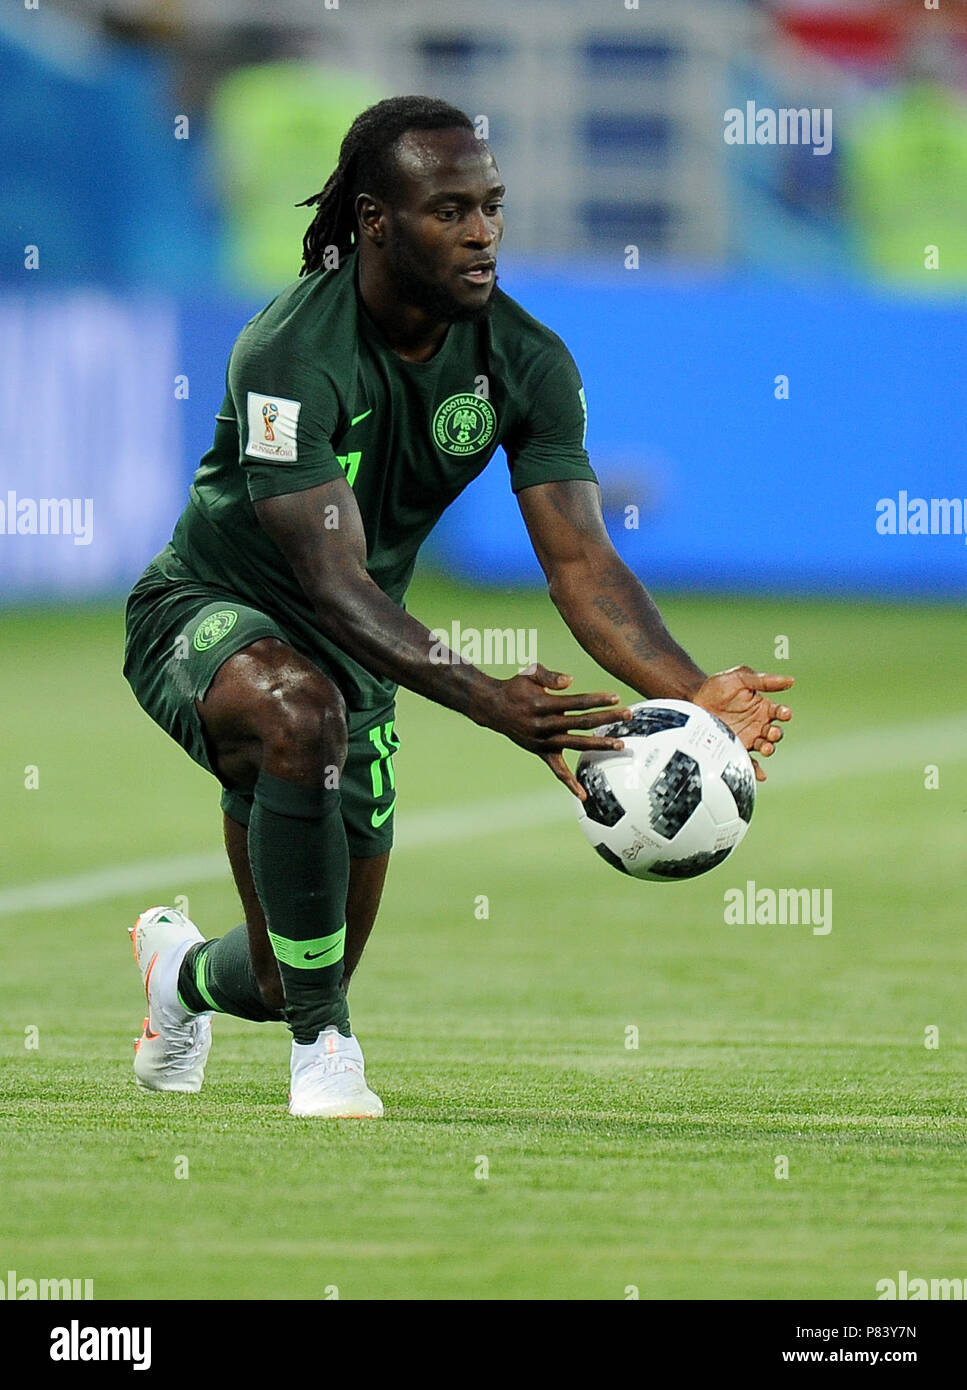 KALININGRAD, RUSSIA - JUNE 16: Victor Moses of Nigeria in action during the 2018 FIFA World Cup Russia group D match between Croatia and Nigeria at Kaliningrad Stadium on June 16, 2018 in Kaliningrad, Russia. (Photo by Norbert Barczyk/PressFocus/MB Media) Stock Photo